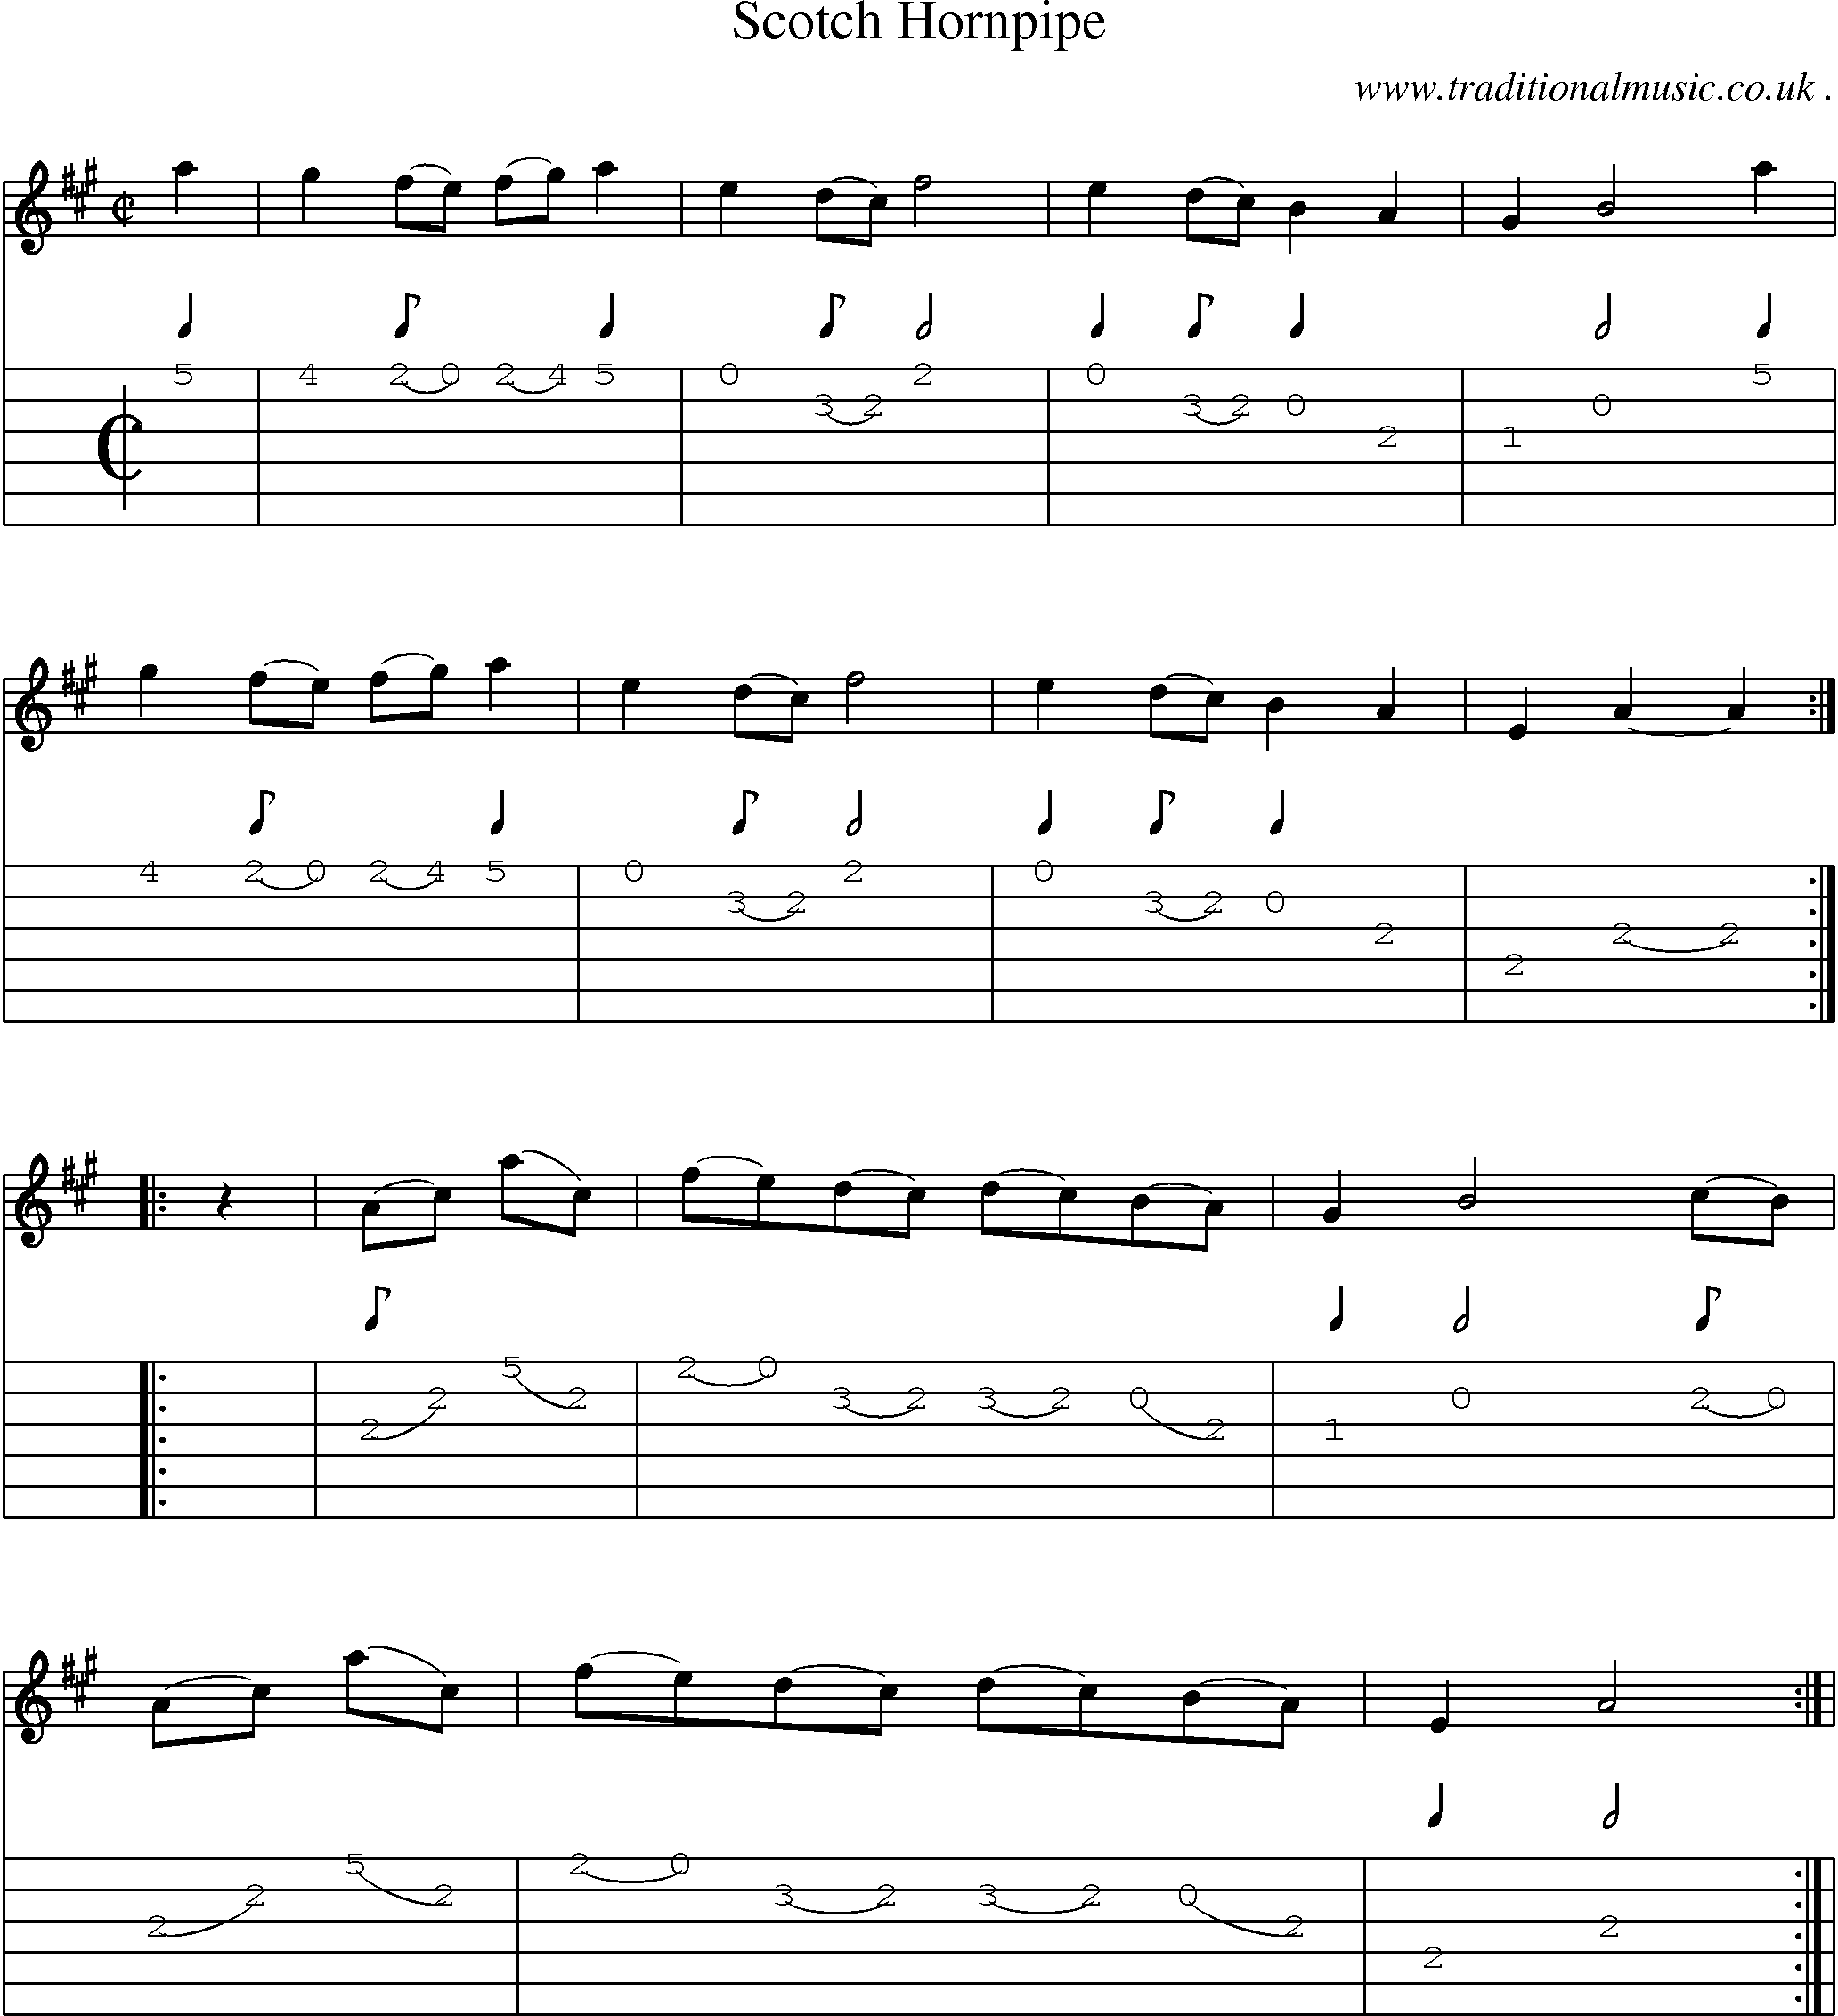 Sheet-Music and Guitar Tabs for Scotch Hornpipe